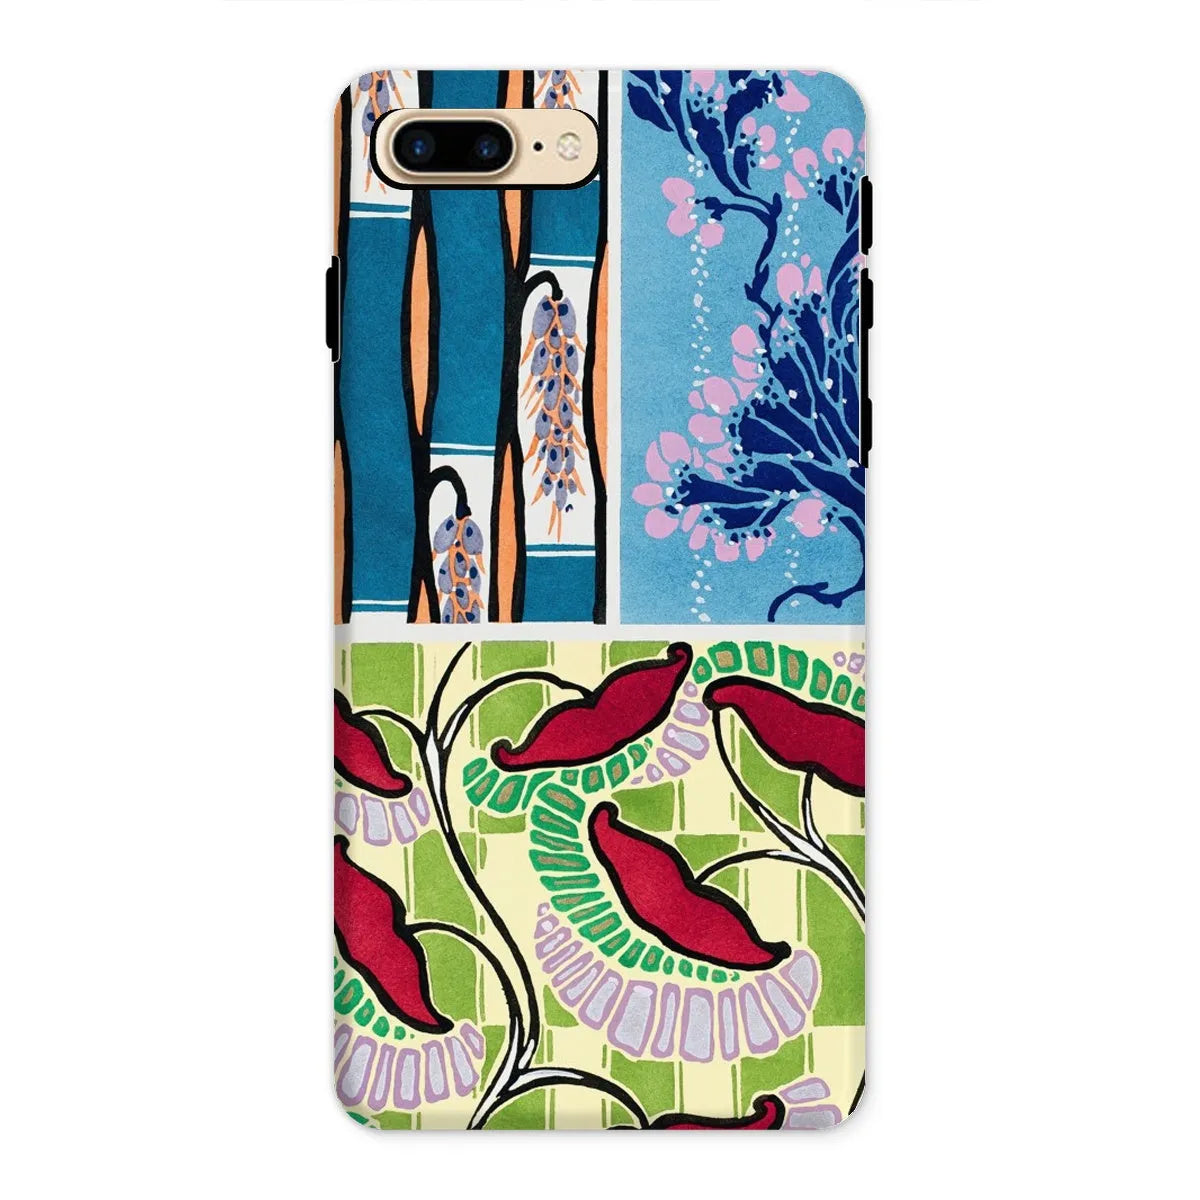 Floral Kitsch Aesthetic Art Phone Case - E.a. Séguy - Iphone 8 Plus / Matte - Mobile Phone Cases - Aesthetic Art